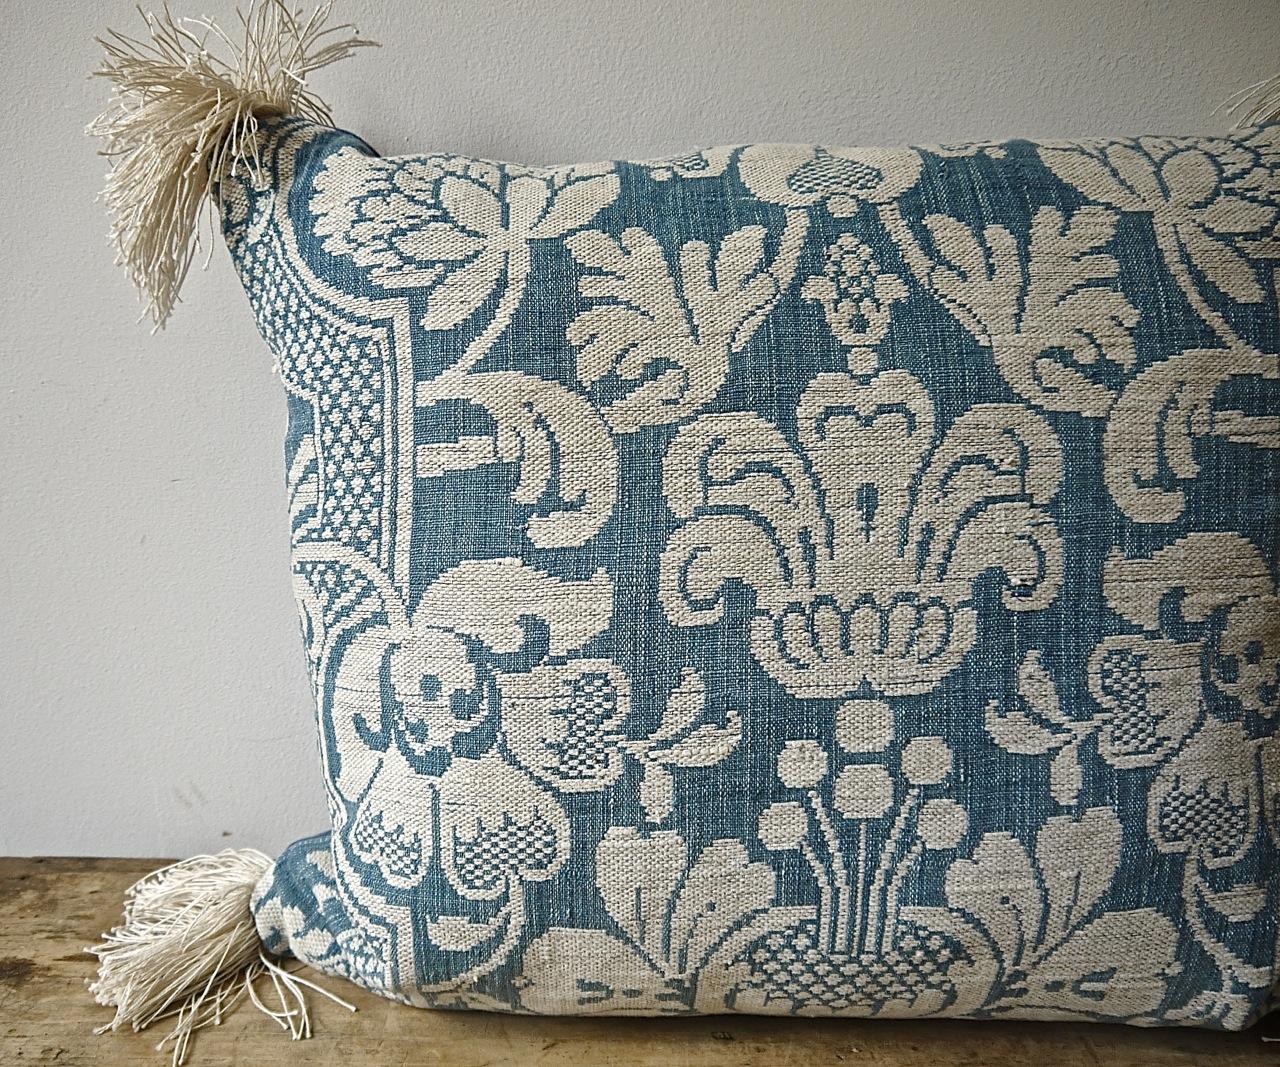 Woven Blue and White Linen and Cotton Pillows, French, circa 1760s